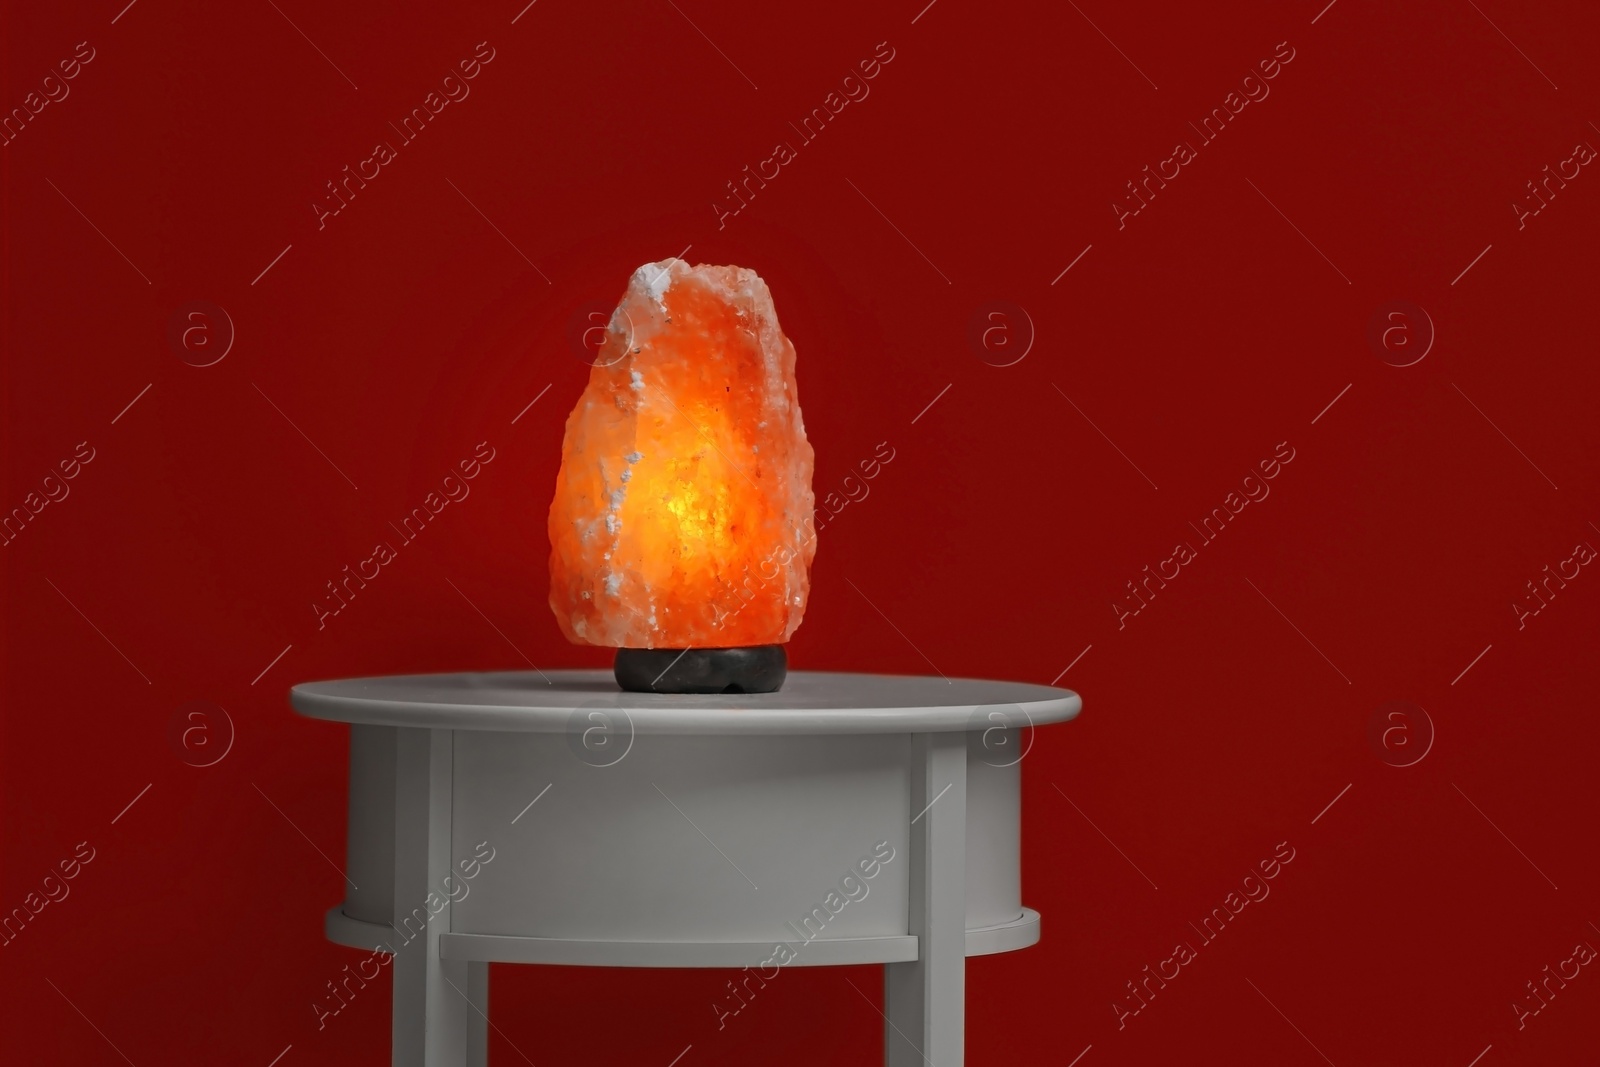 Photo of Himalayan salt lamp on table against dark red background